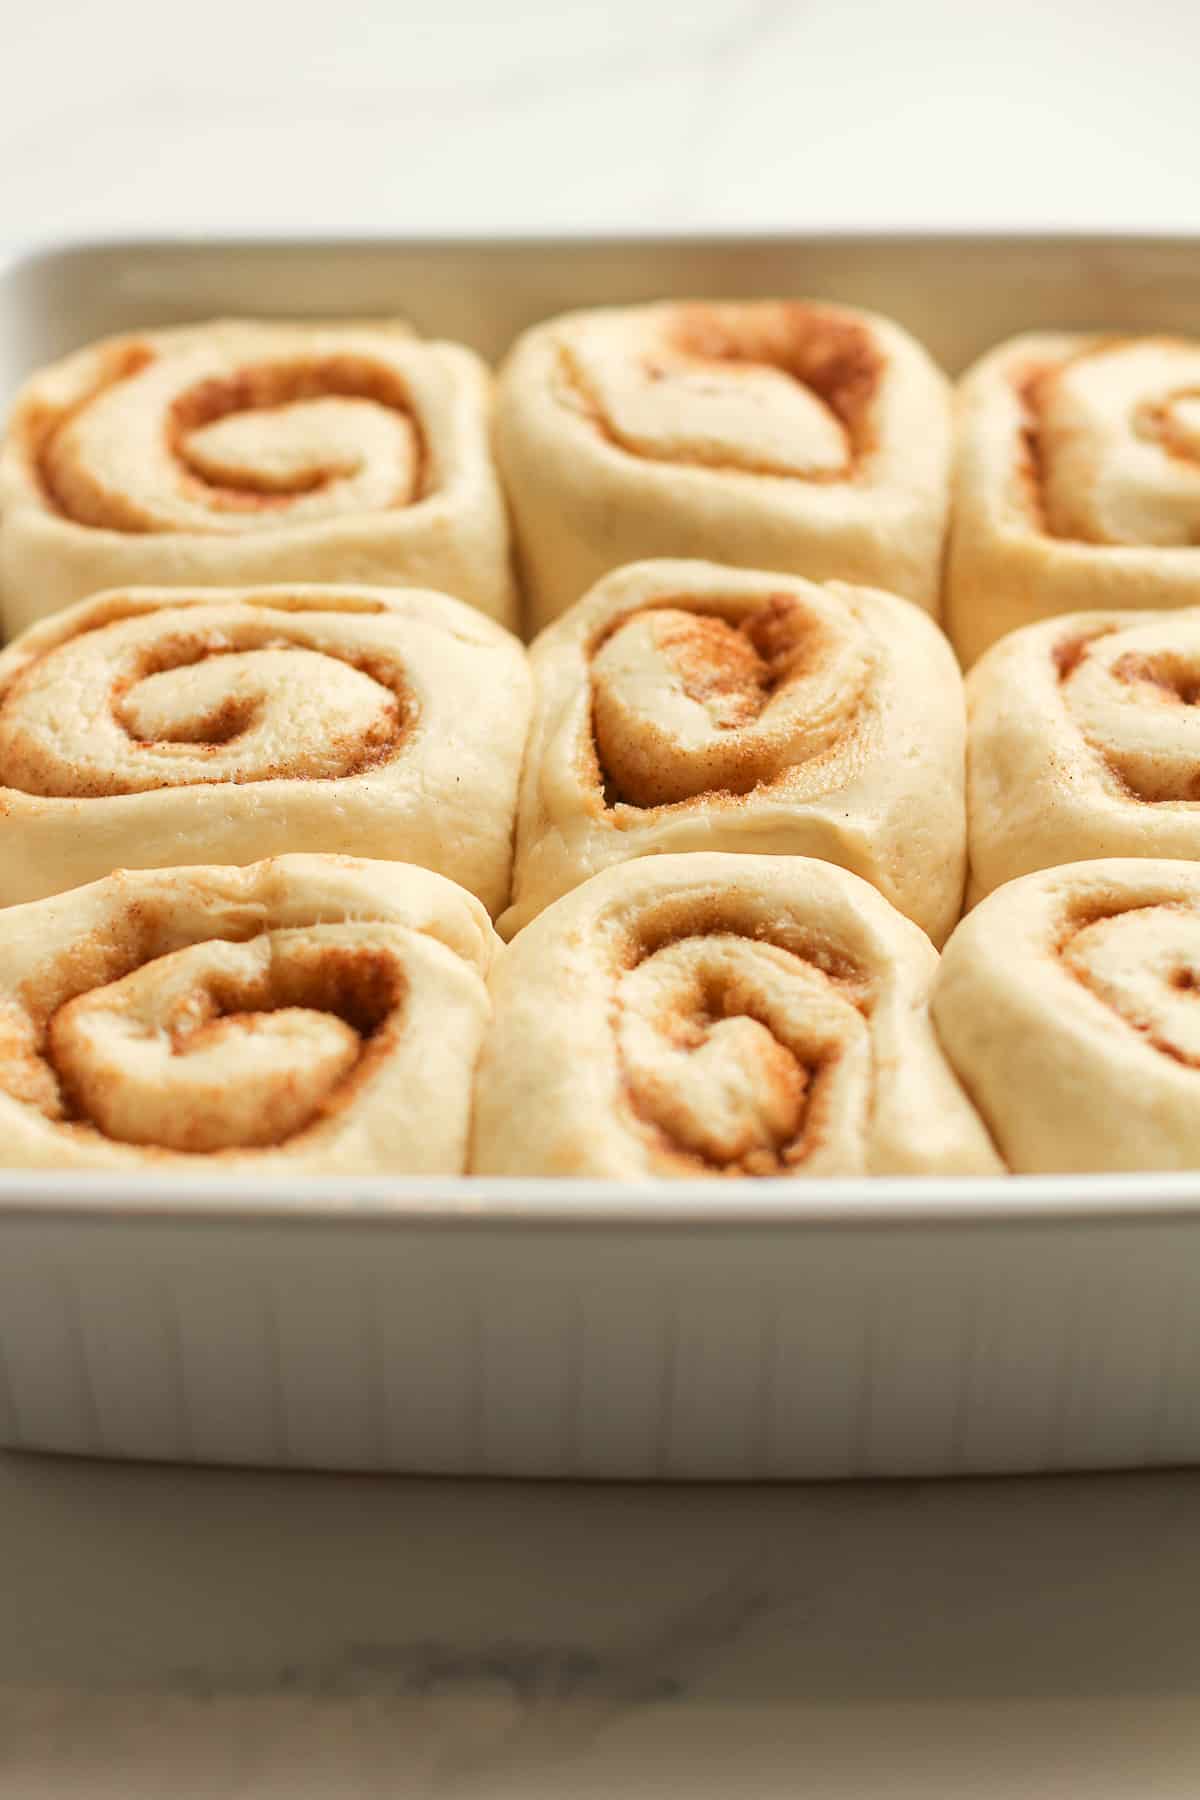 Side shot of the cinnamon rolls in a dish.